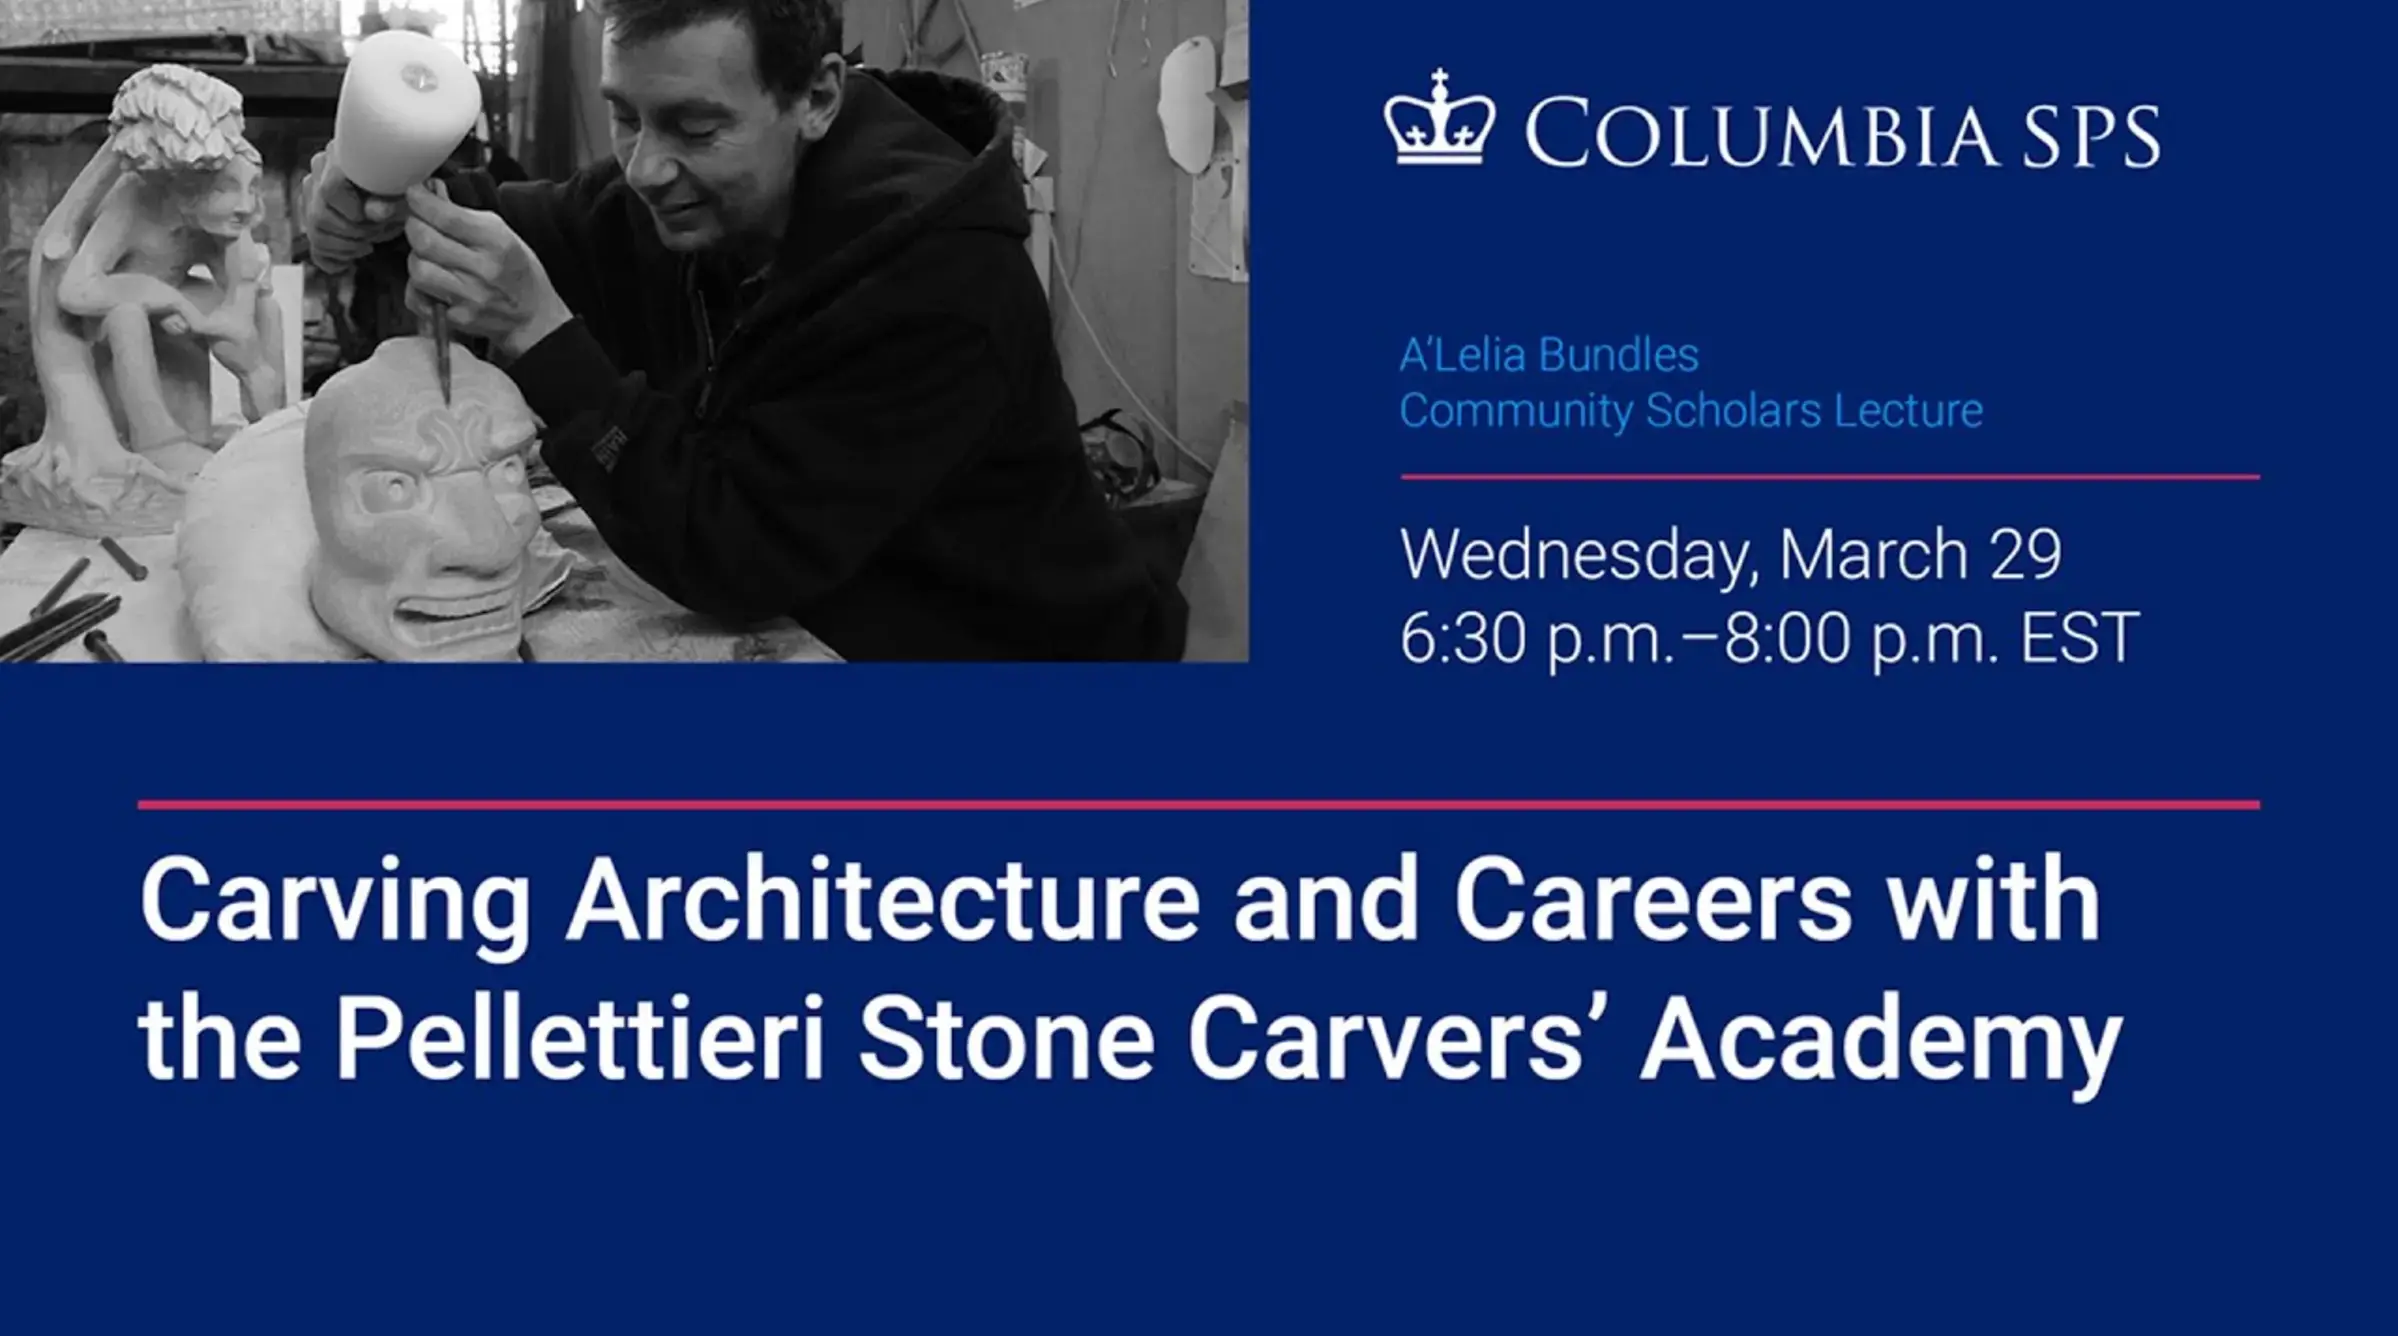 Carving Architecture & Careers with the Pellettieri Stone Carvers’ Academy